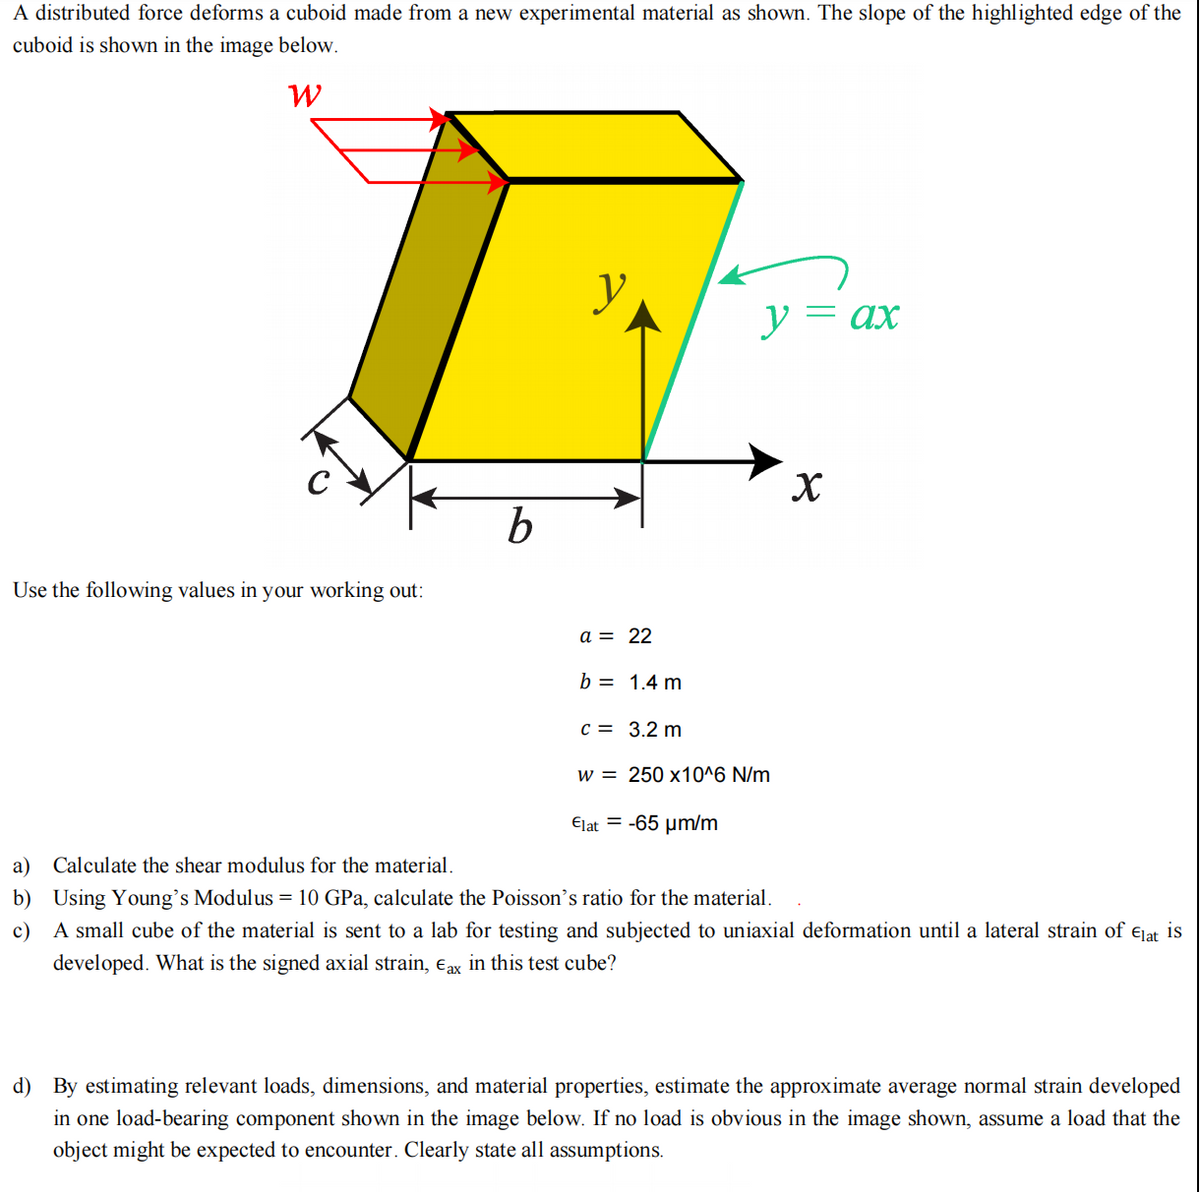 A distributed force deforms a cuboid made from a new experimental material as shown. The slope of the highlighted edge of the
cuboid is shown in the image below.
W
Use the following values in your working out:
b
a = 22
b = 1.4 m
y = ax
c = 3.2 m
w = 250 x10^6 N/m
Elat= -65 μm/m
X
a) Calculate the shear modulus for the material.
b) Using Young's Modulus = 10 GPa, calculate the Poisson's ratio for the material.
c) A small cube of the material is sent to a lab for testing and subjected to uniaxial deformation until a lateral strain of Elat is
developed. What is the signed axial strain, Eax in this test cube?
d) By estimating relevant loads, dimensions, and material properties, estimate the approximate average normal strain developed
in one load-bearing component shown in the image below. If no load is obvious in the image shown, assume a load that the
object might be expected to encounter. Clearly state all assumptions.